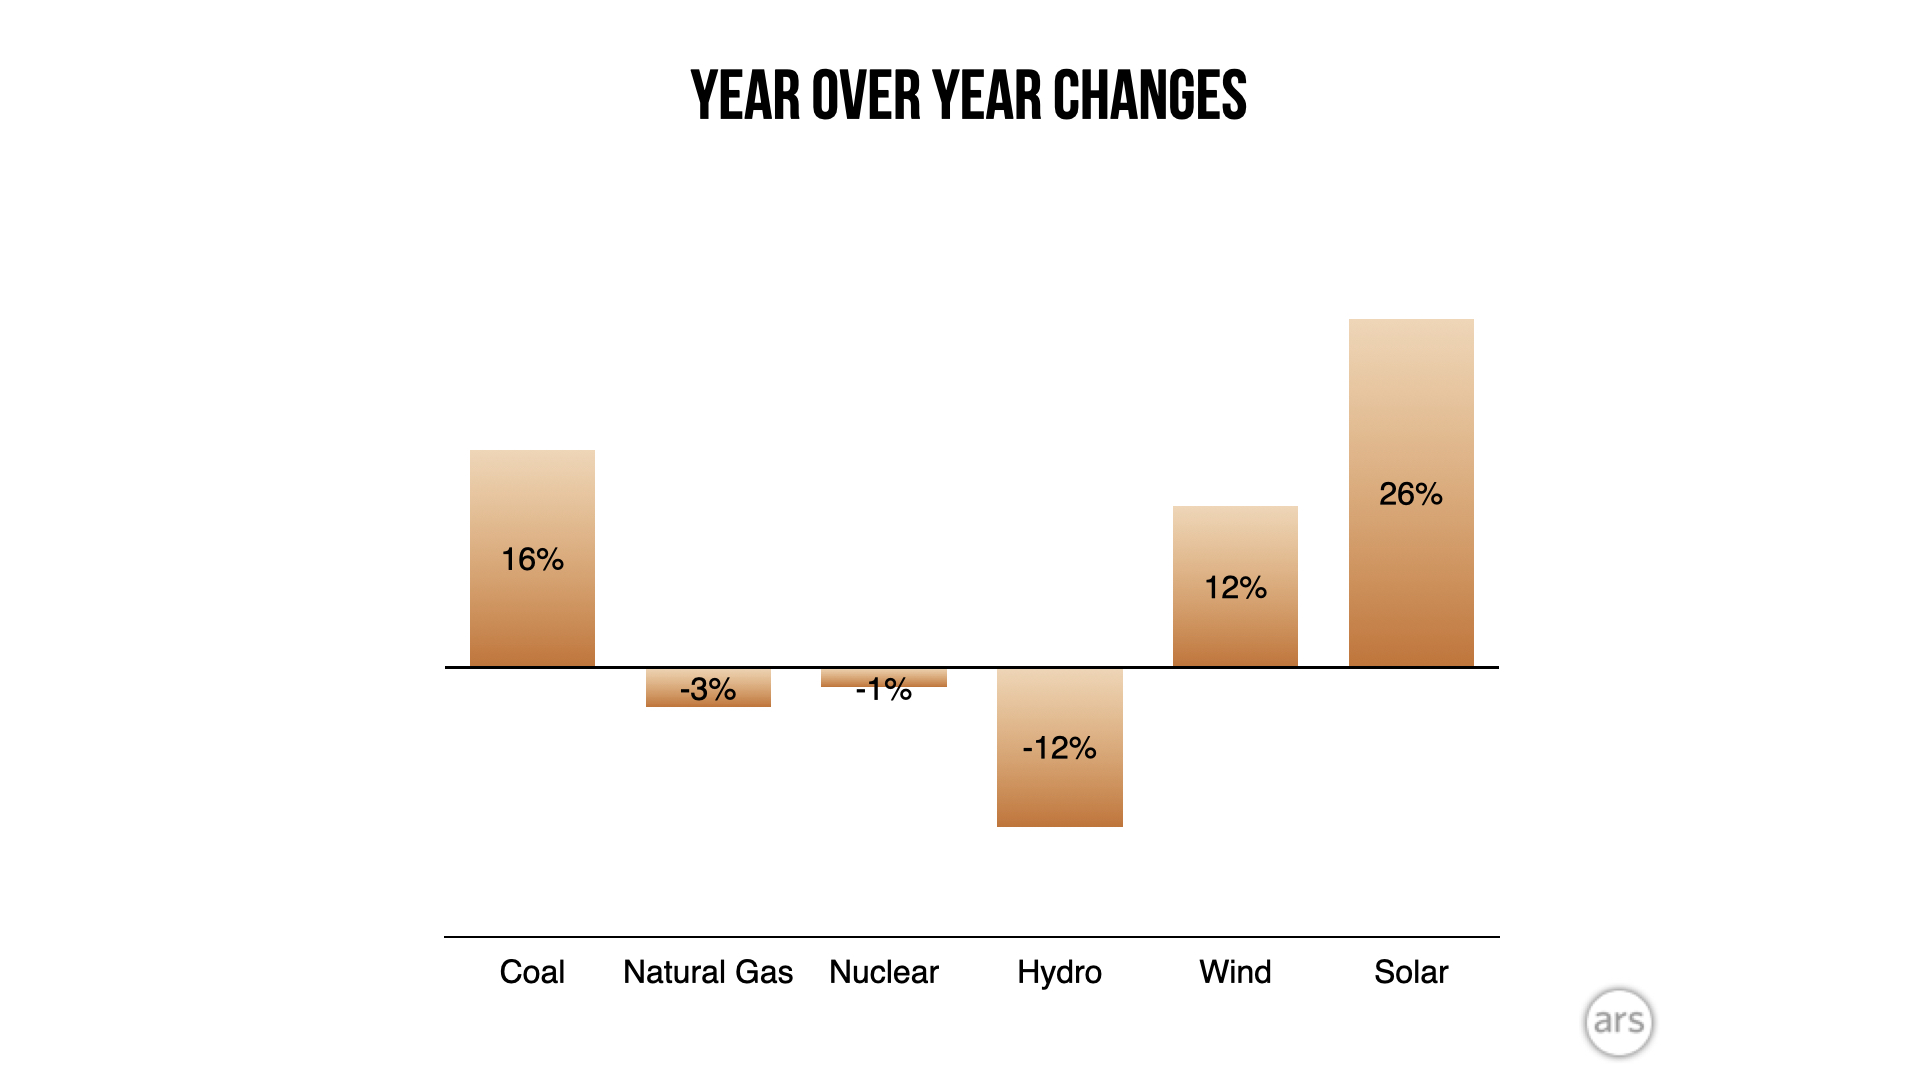 Compared to 2020, a variety of electricity sources saw significant changes.